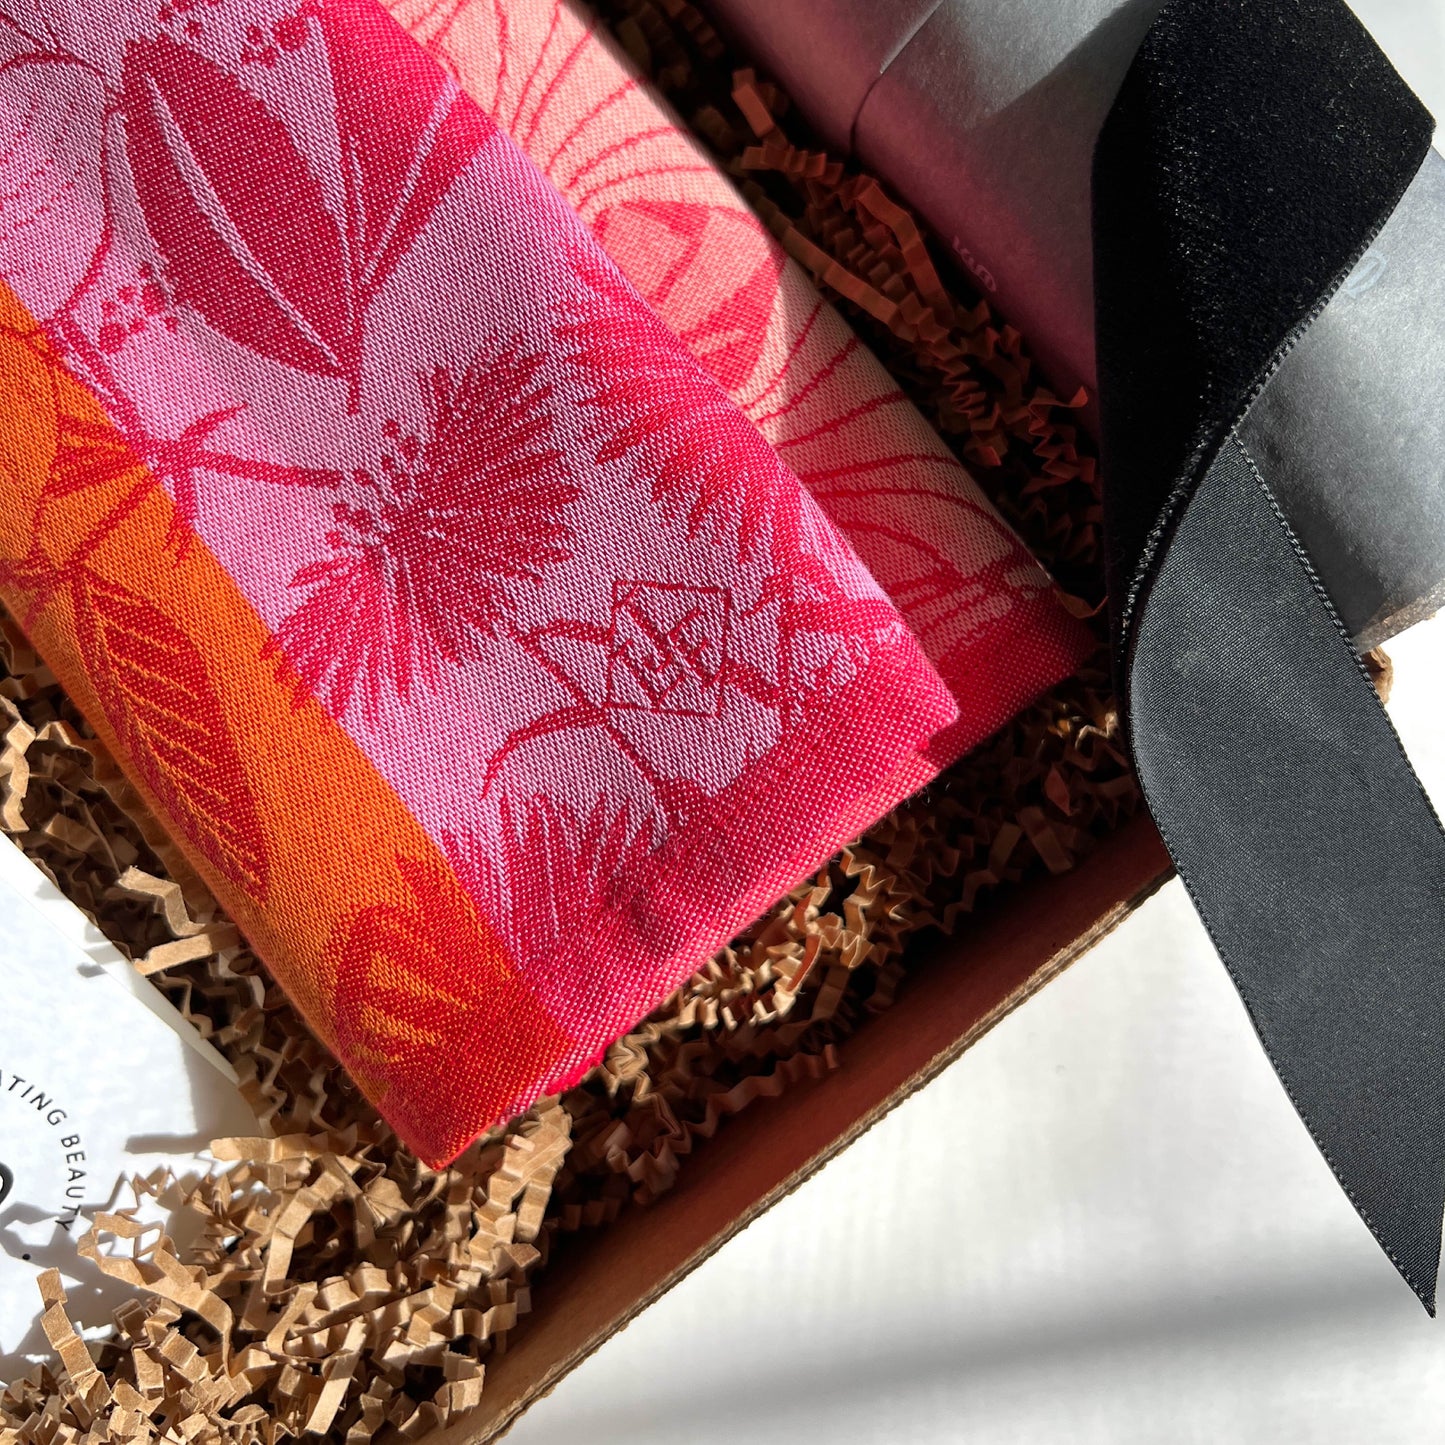 'Ripe To Gift' Candle & Tea Towel Gift Set